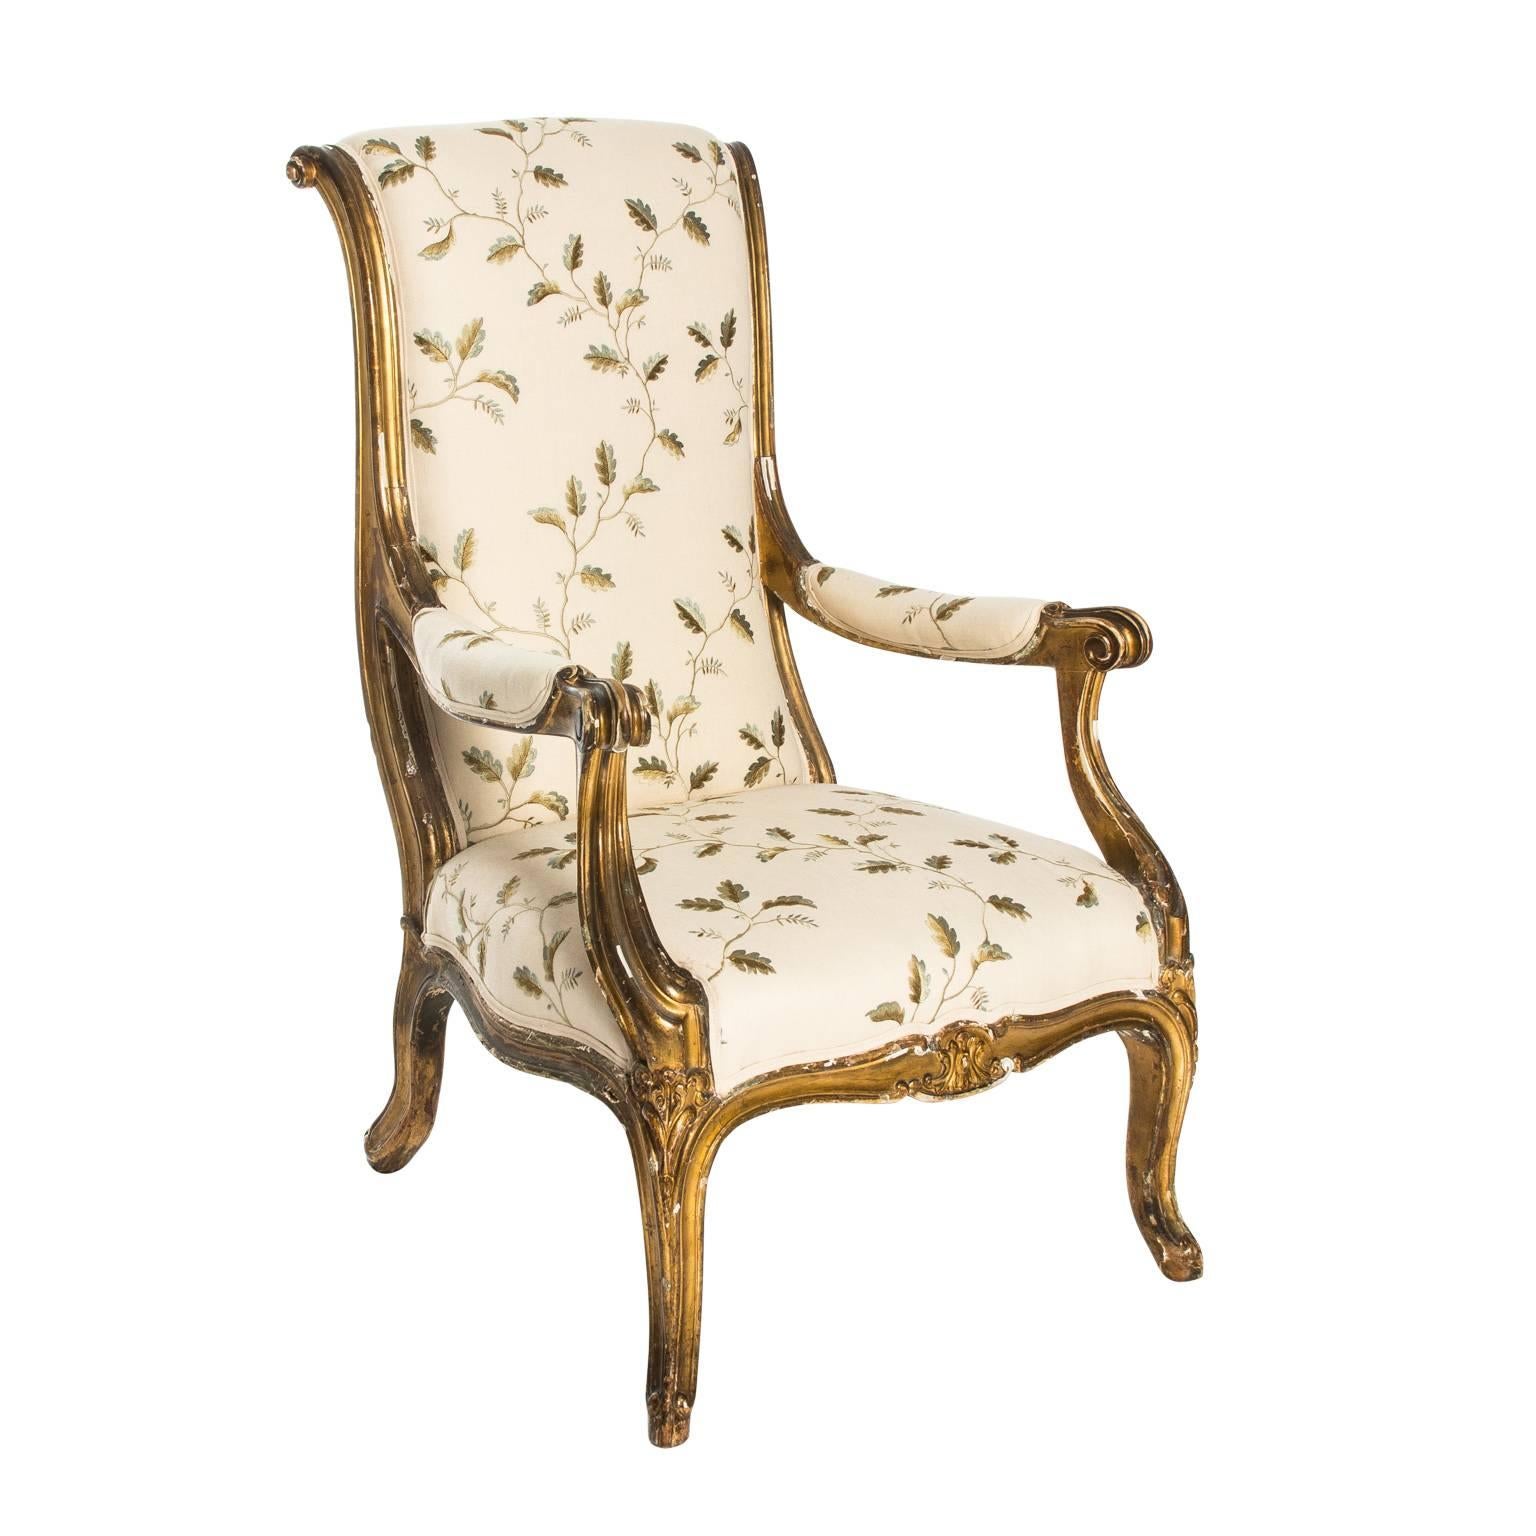 Upholstered Russian open armchair with gold gilt, circa 19th century.
 